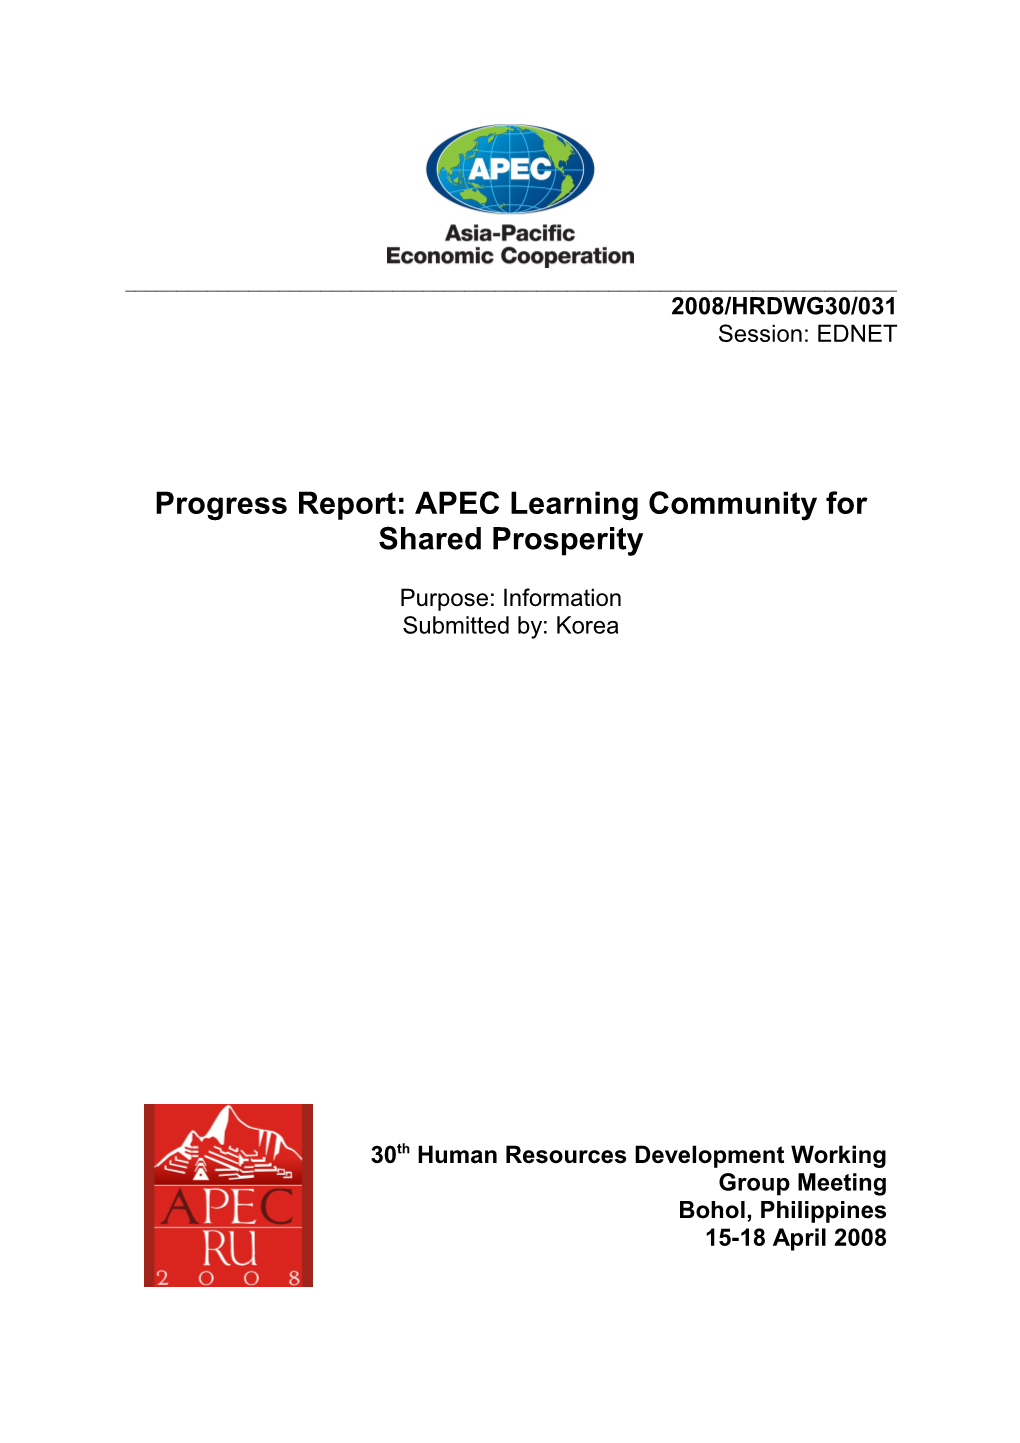 Annex G - Guidebook on APEC Projects